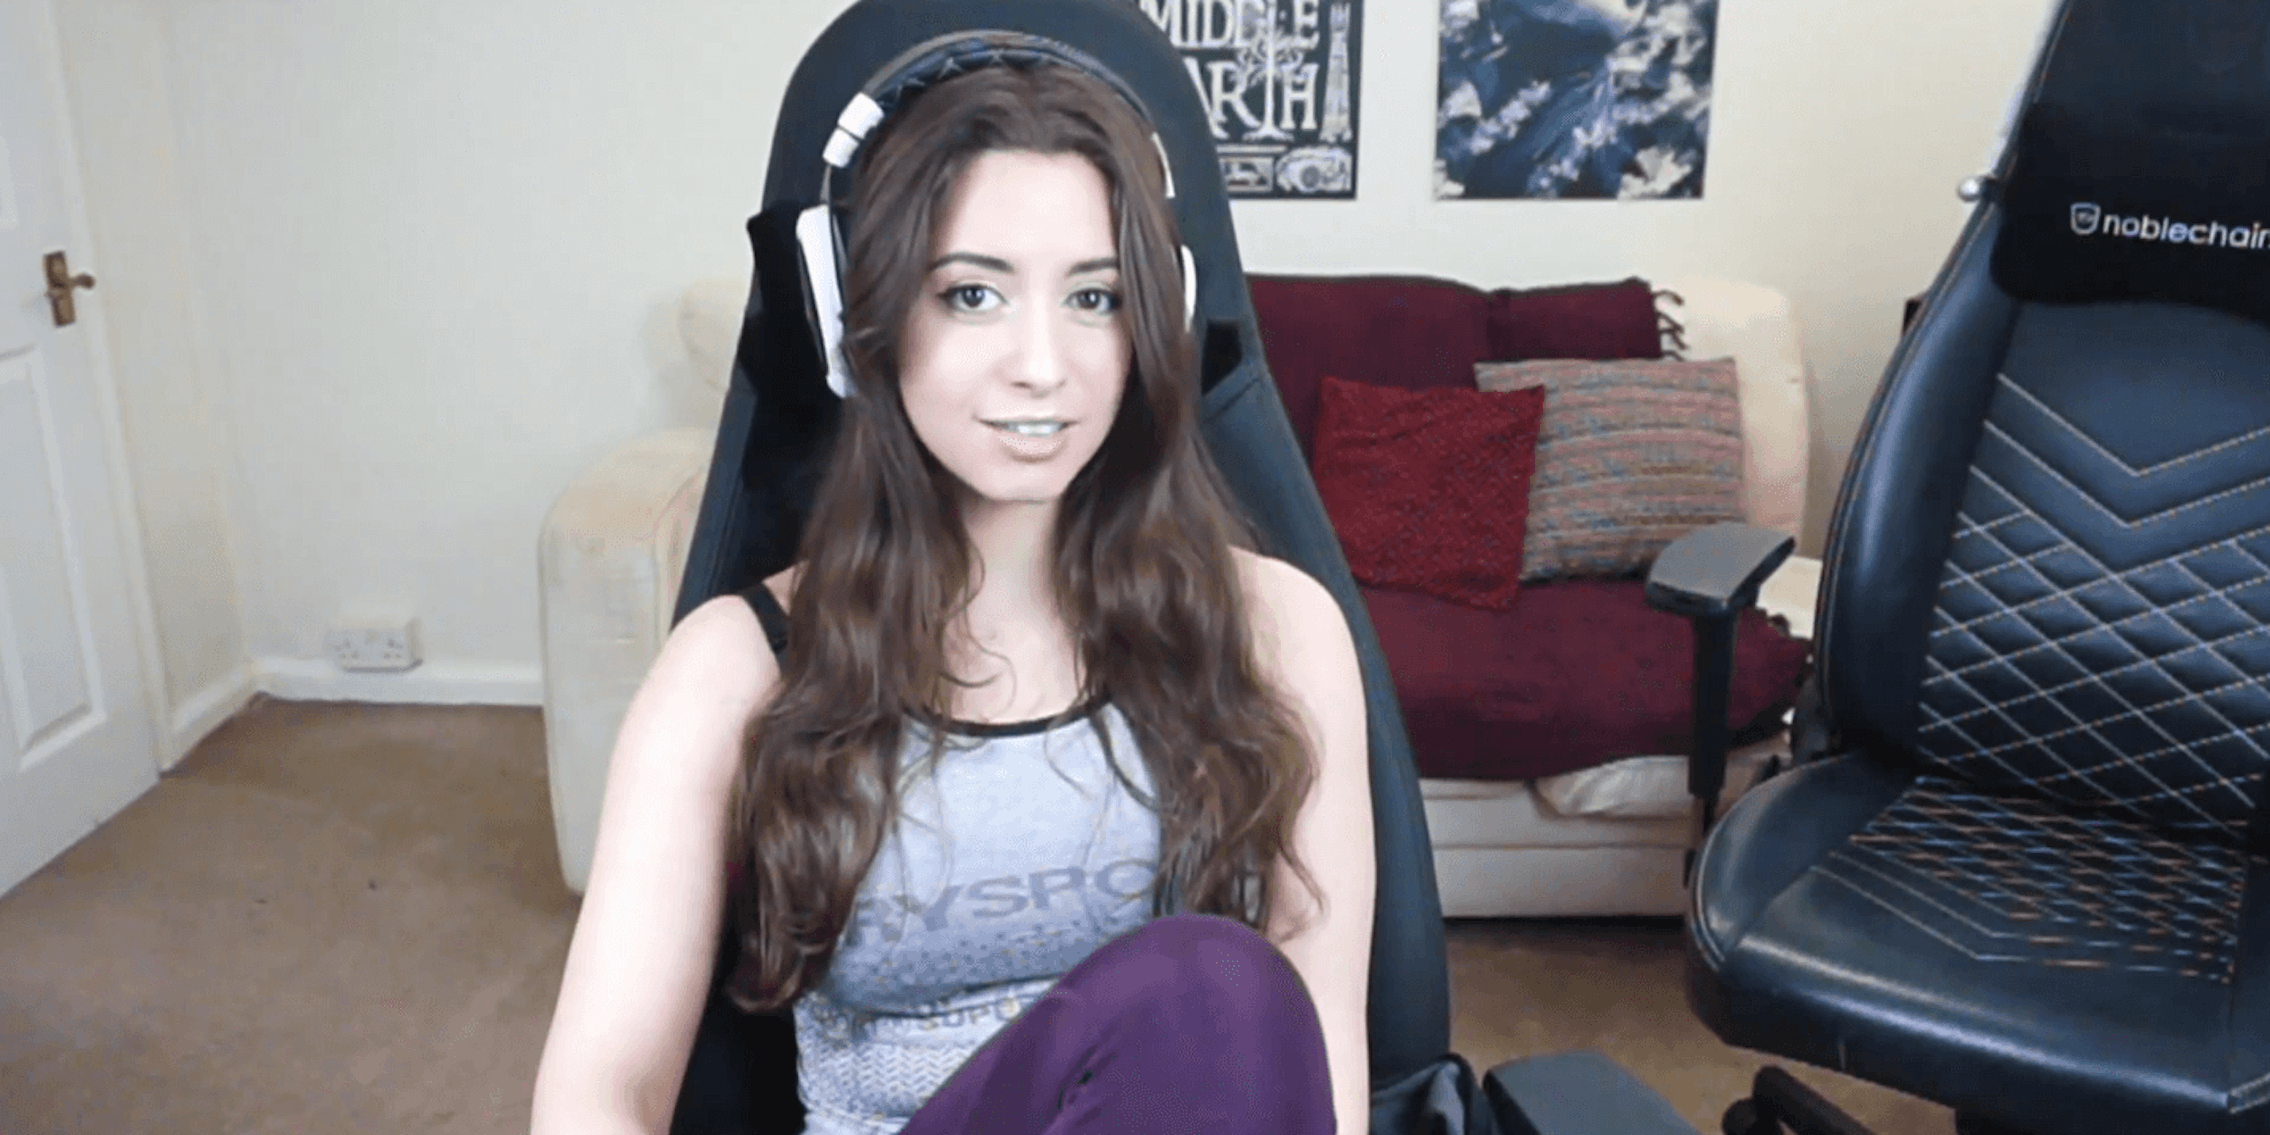 Twitch Sweet Anita stalker arrested convicted